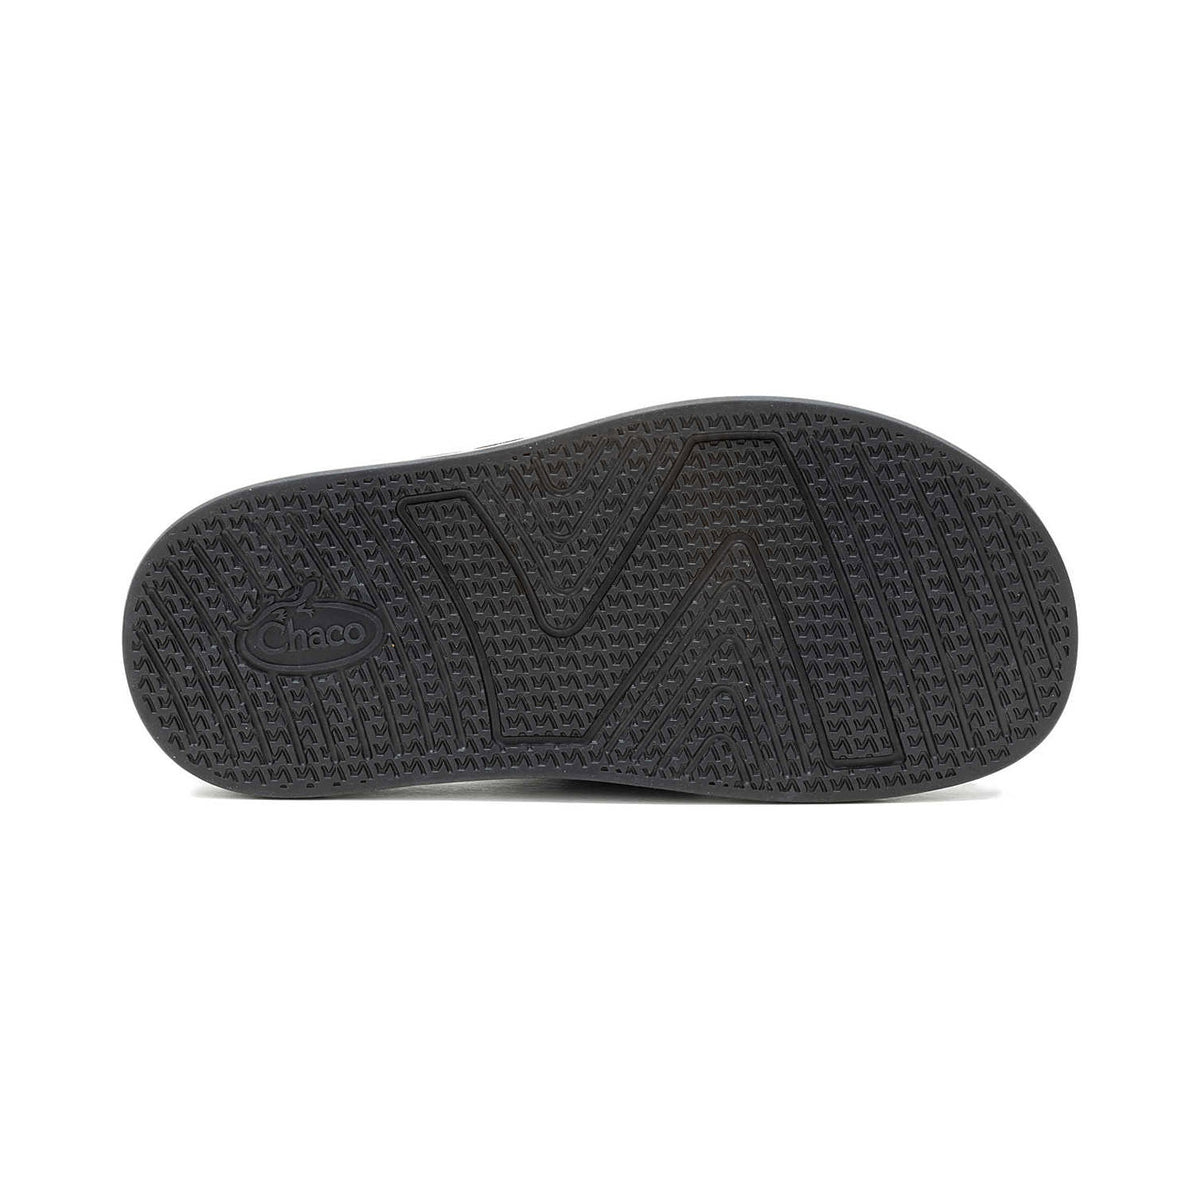 Bottom view of a Chaco Townes Slide Black - Womens sandal sole displaying intricate tread patterns and the Chaco logo on its LUVSEAT footbed.